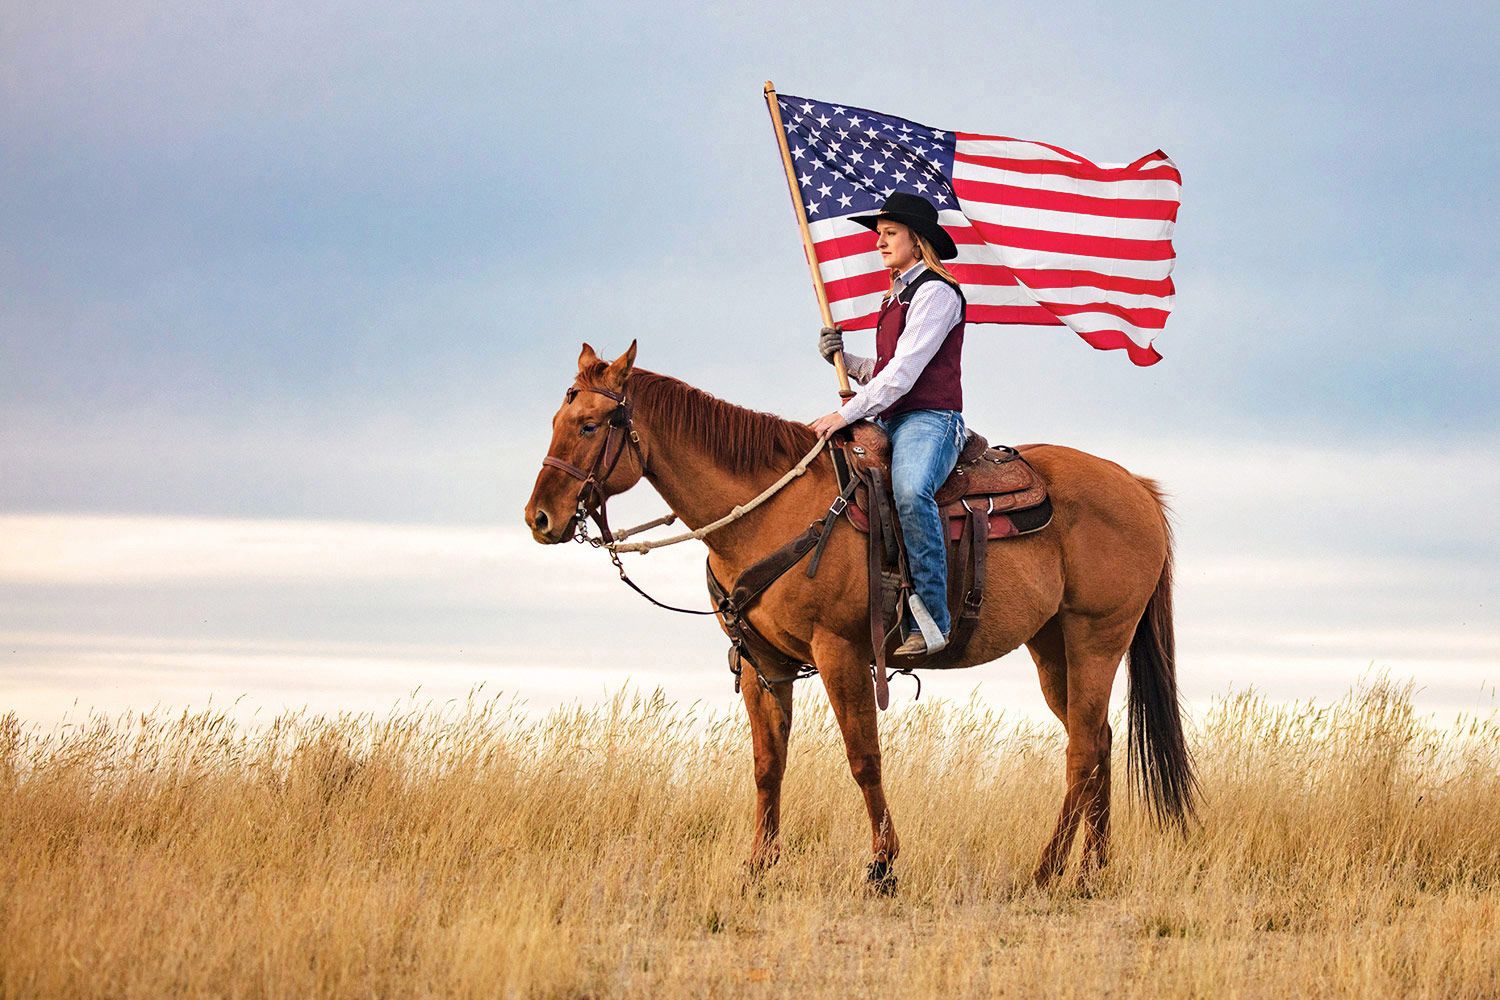 Cowgirl-Riding-Horse-With-American-Flag-Photo.jpg